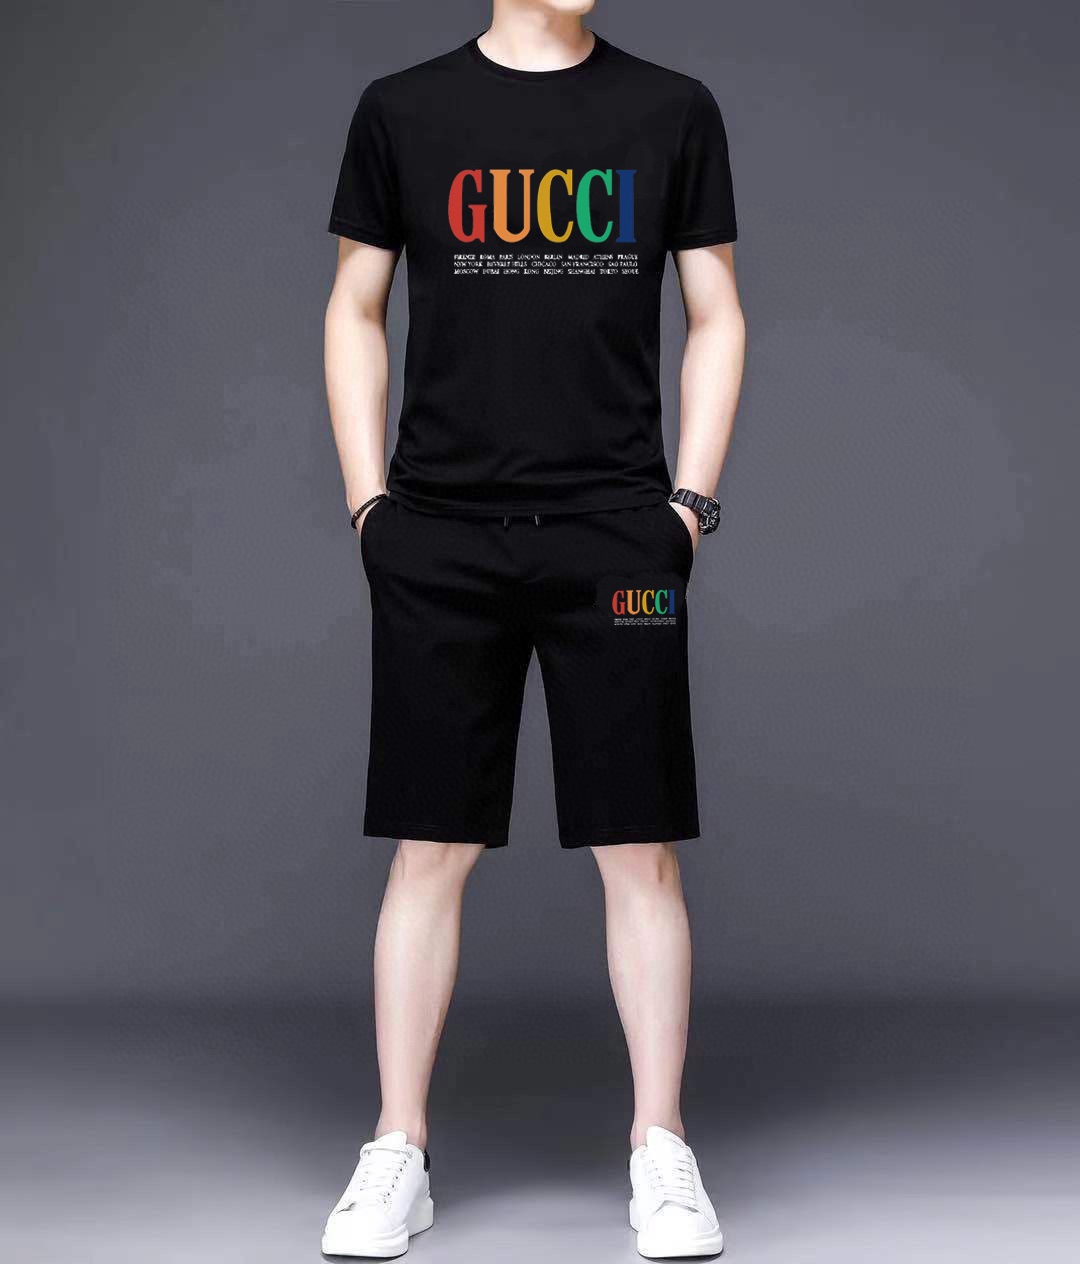 Gucci Clothing Shorts T-Shirt Two Piece Outfits & Matching Sets Men Short Sleeve